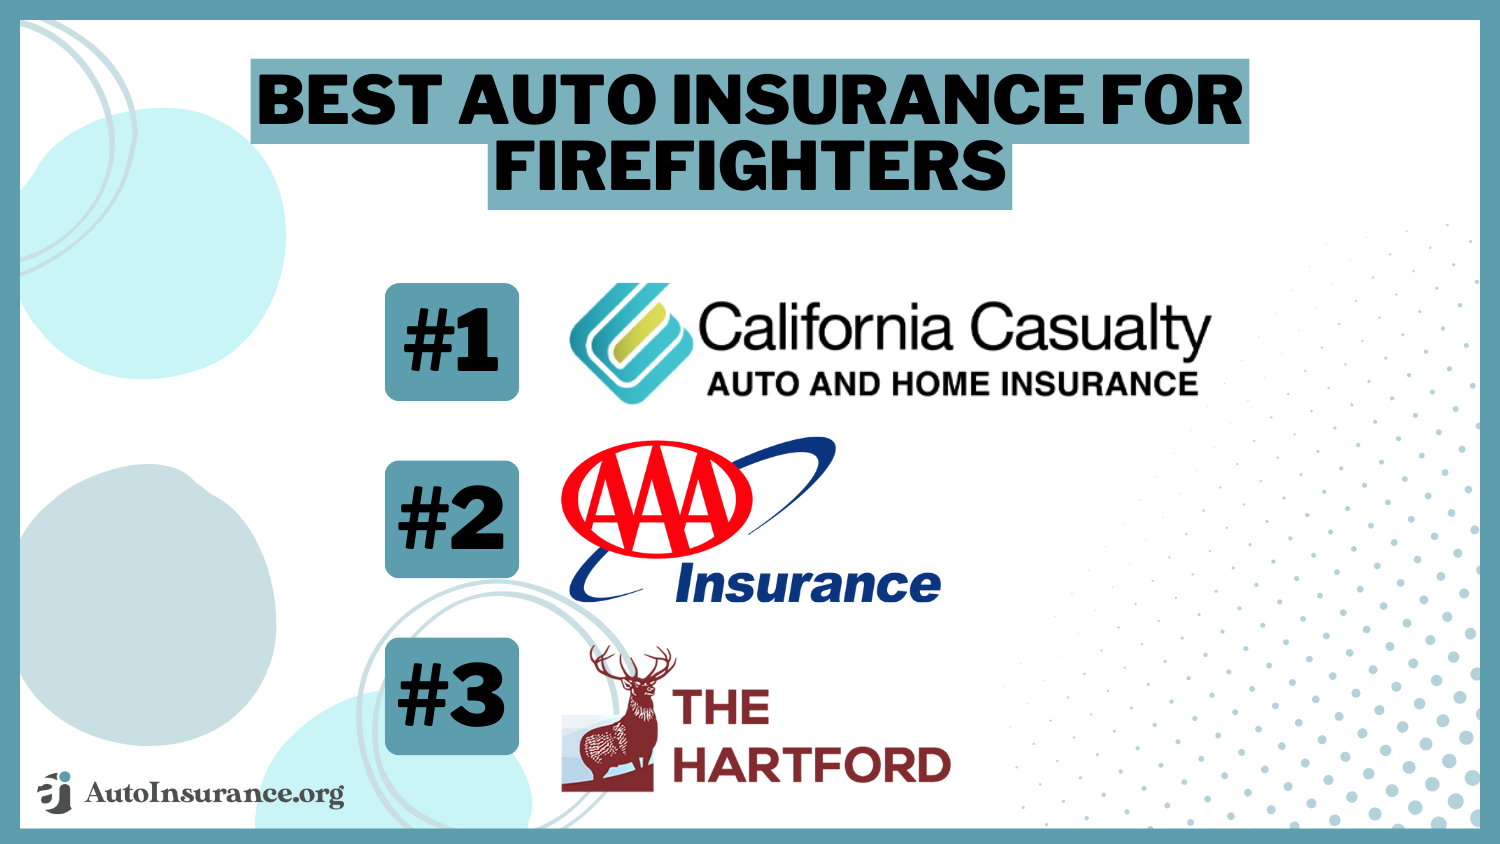 California Casualty AAA insurance the Hartford best auto insurance for firefighters